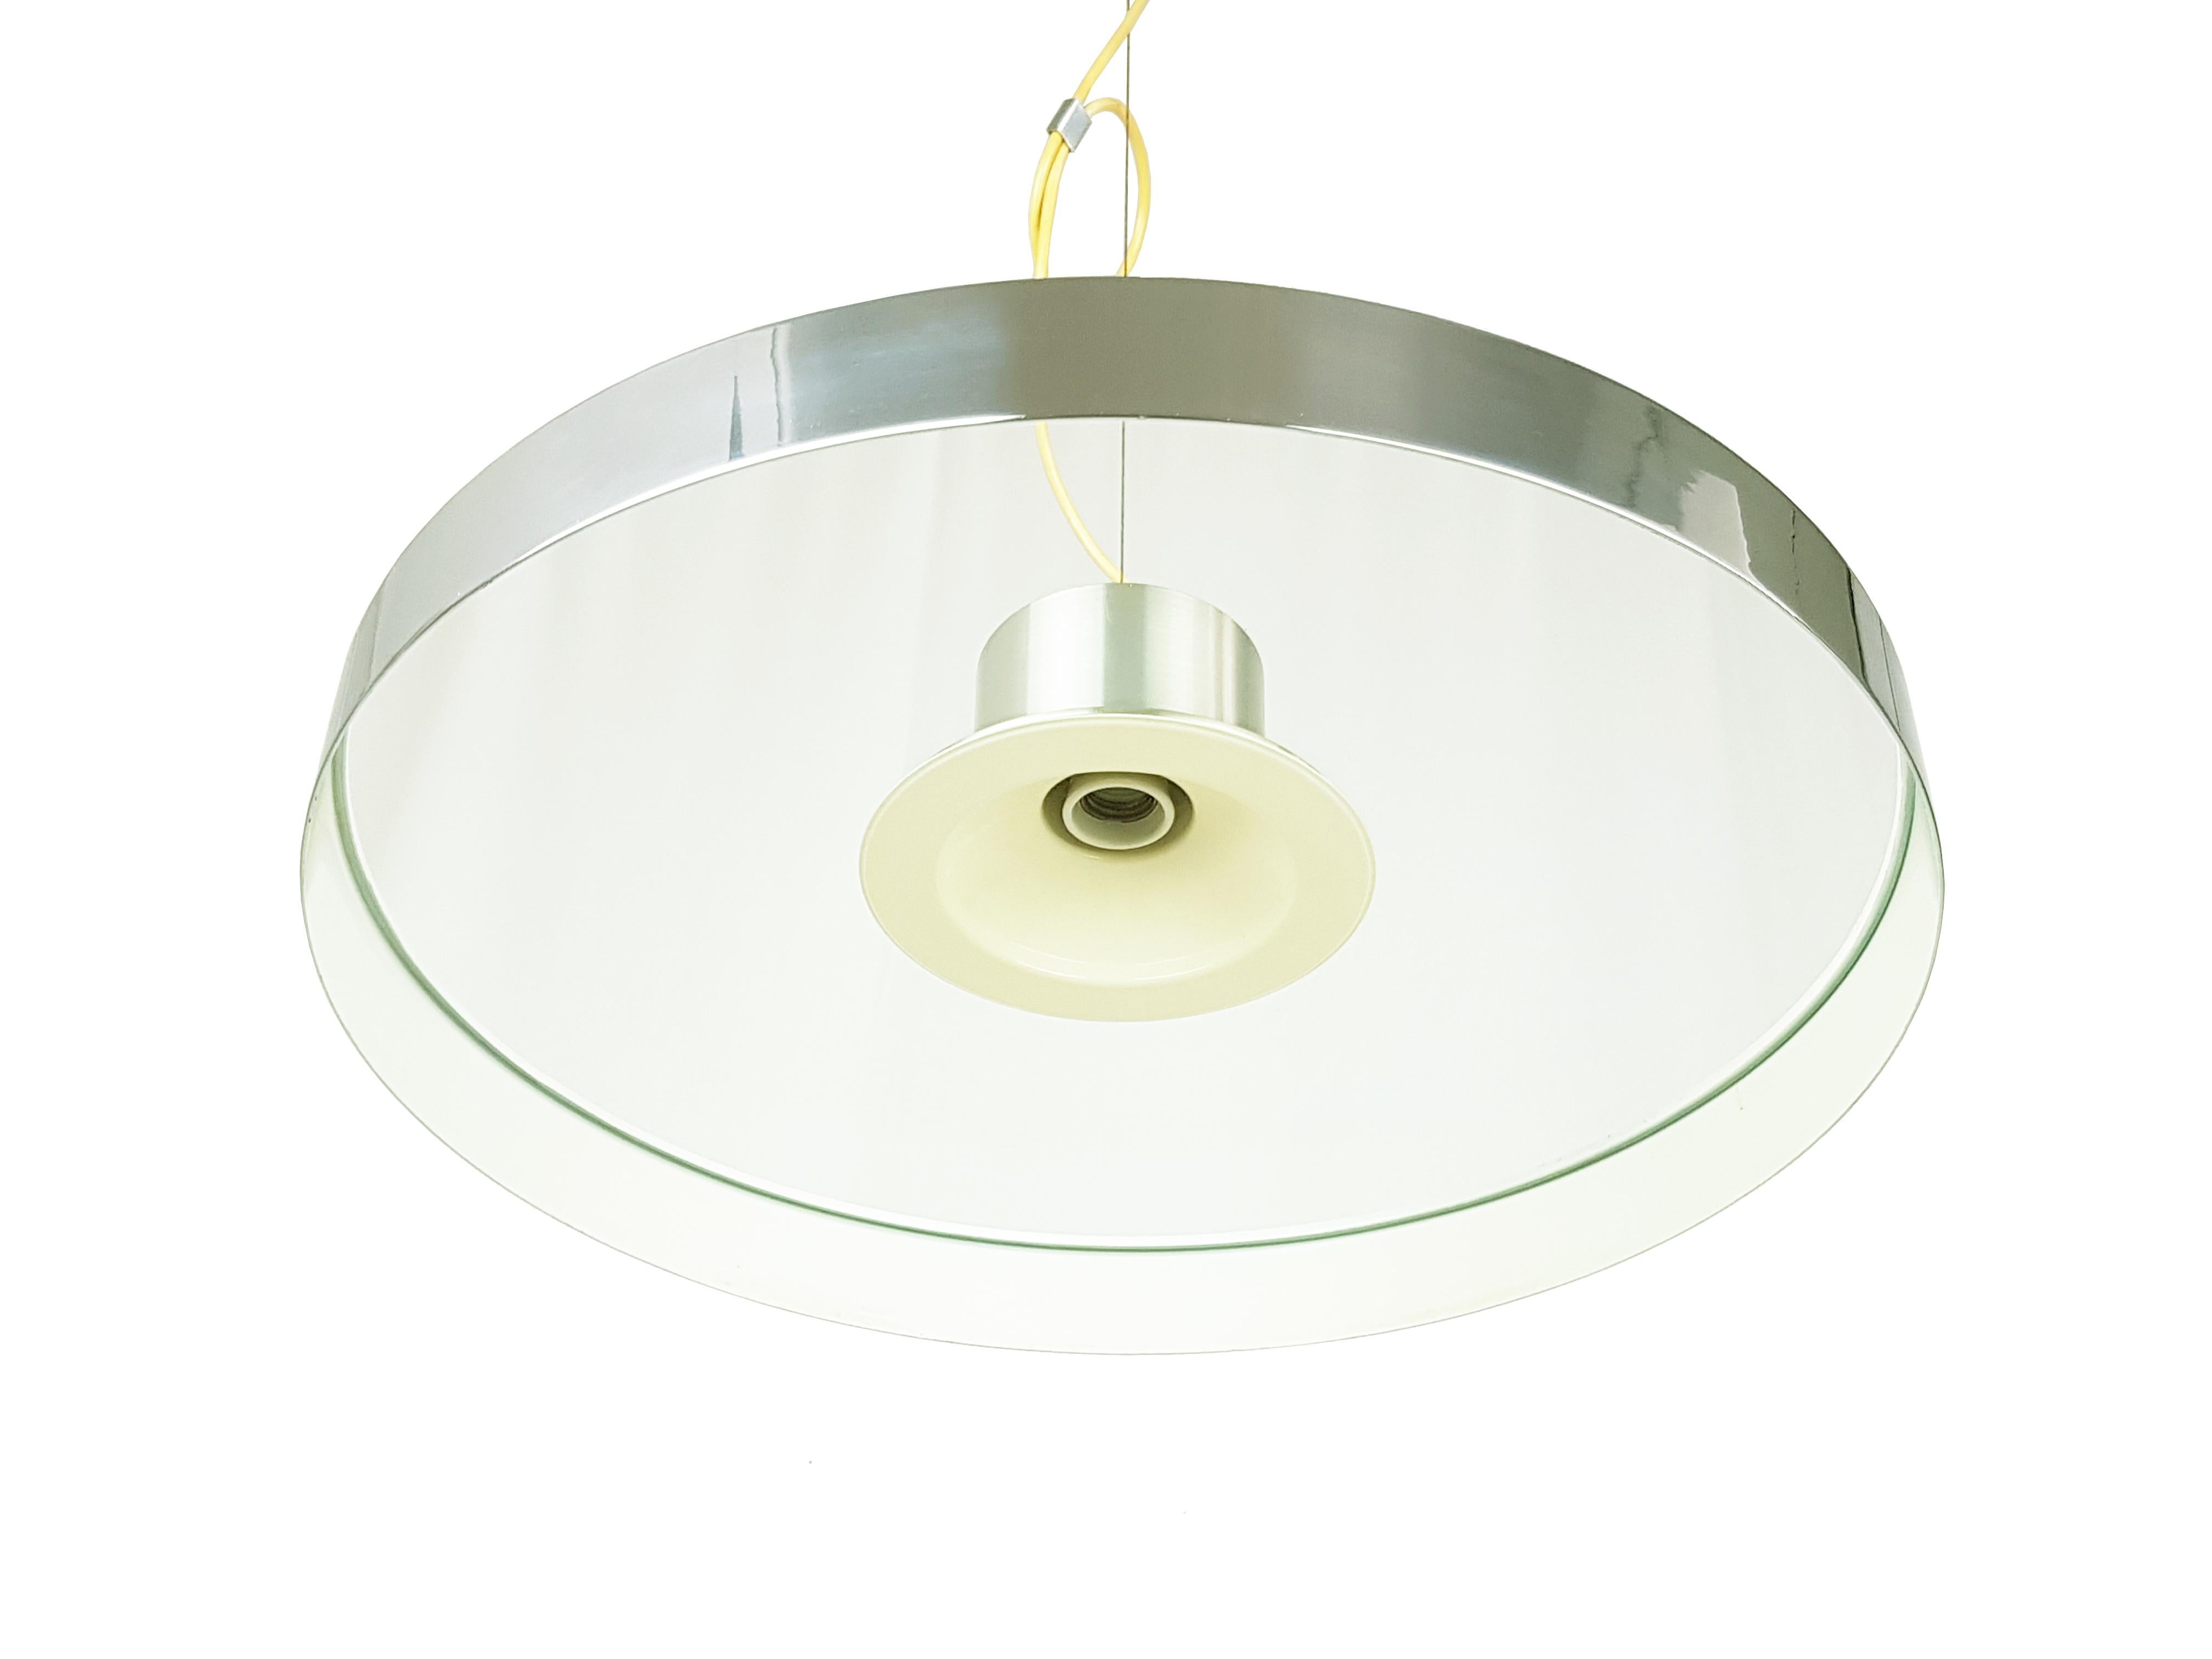 Fine and elegant pendant lamp from the 70s. This lamp was produced in Italy and it is made from aluminum (Canopy and upper body), chrome plated & white painted metal (ring shade) and round glass (shade). The thick metal circle is simply leaning